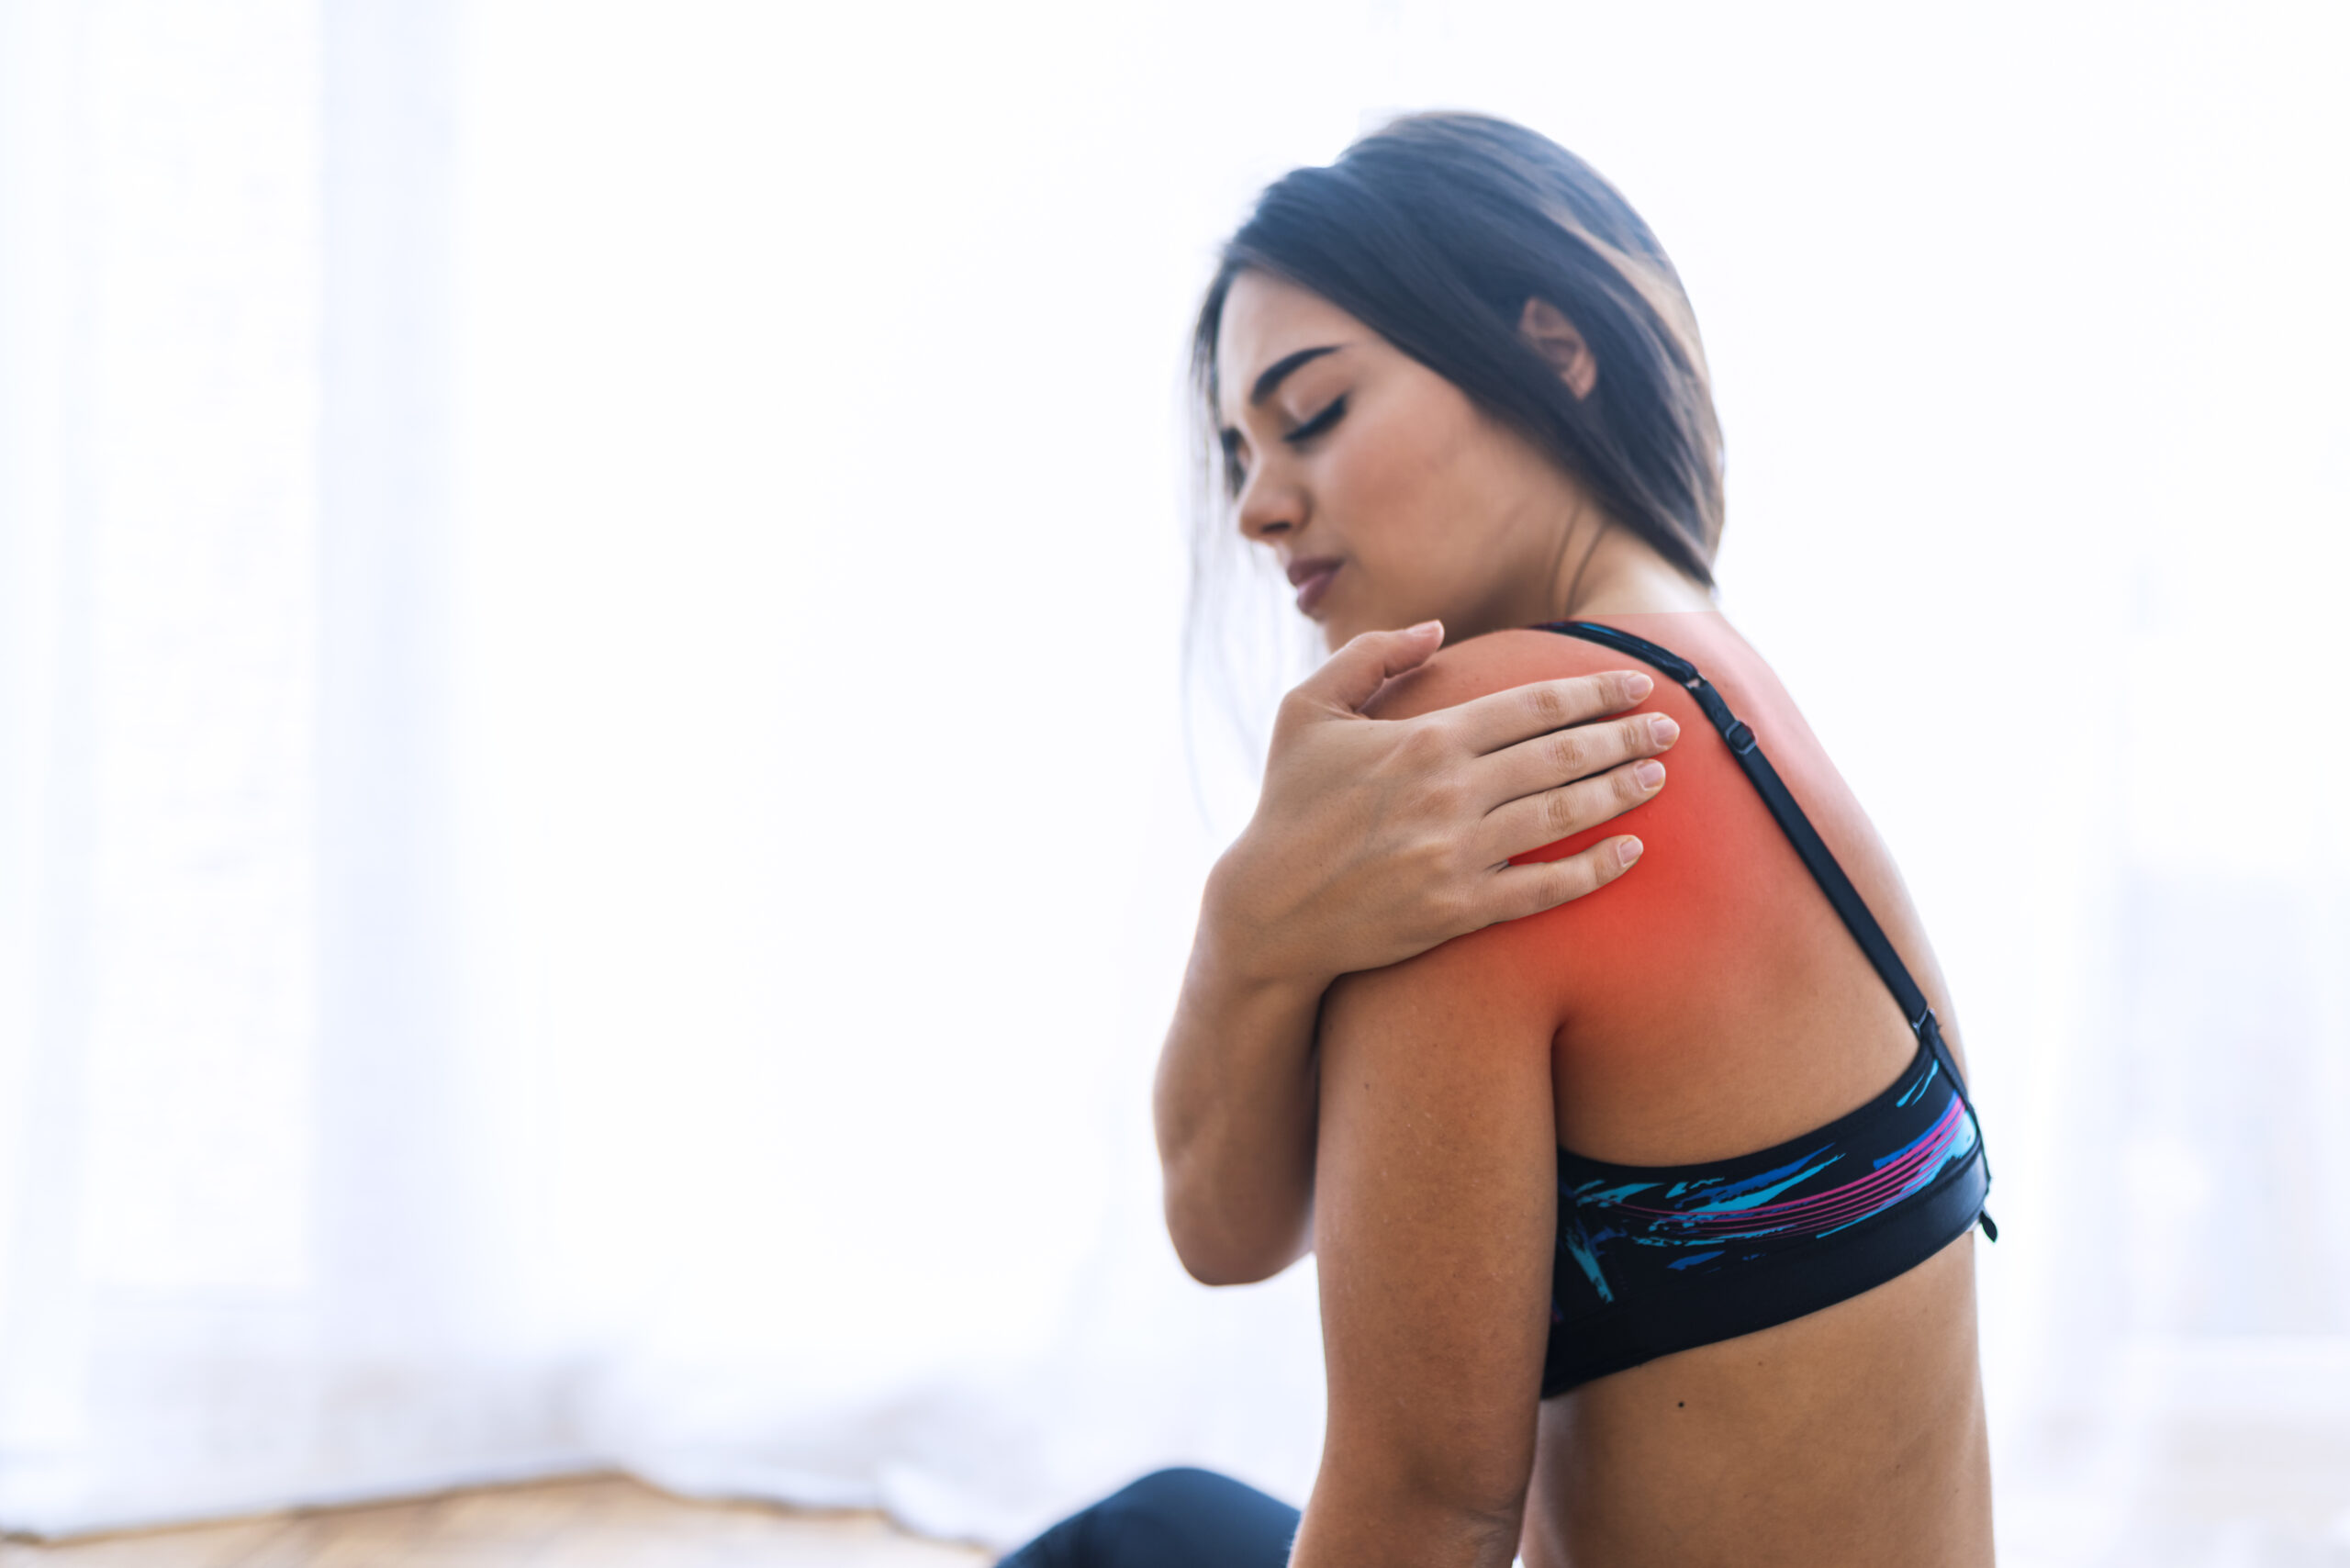 https://optimalchirond.com/wp-content/uploads/2023/10/Chiropractic-care-for-shoulder-pain-2-scaled.jpg